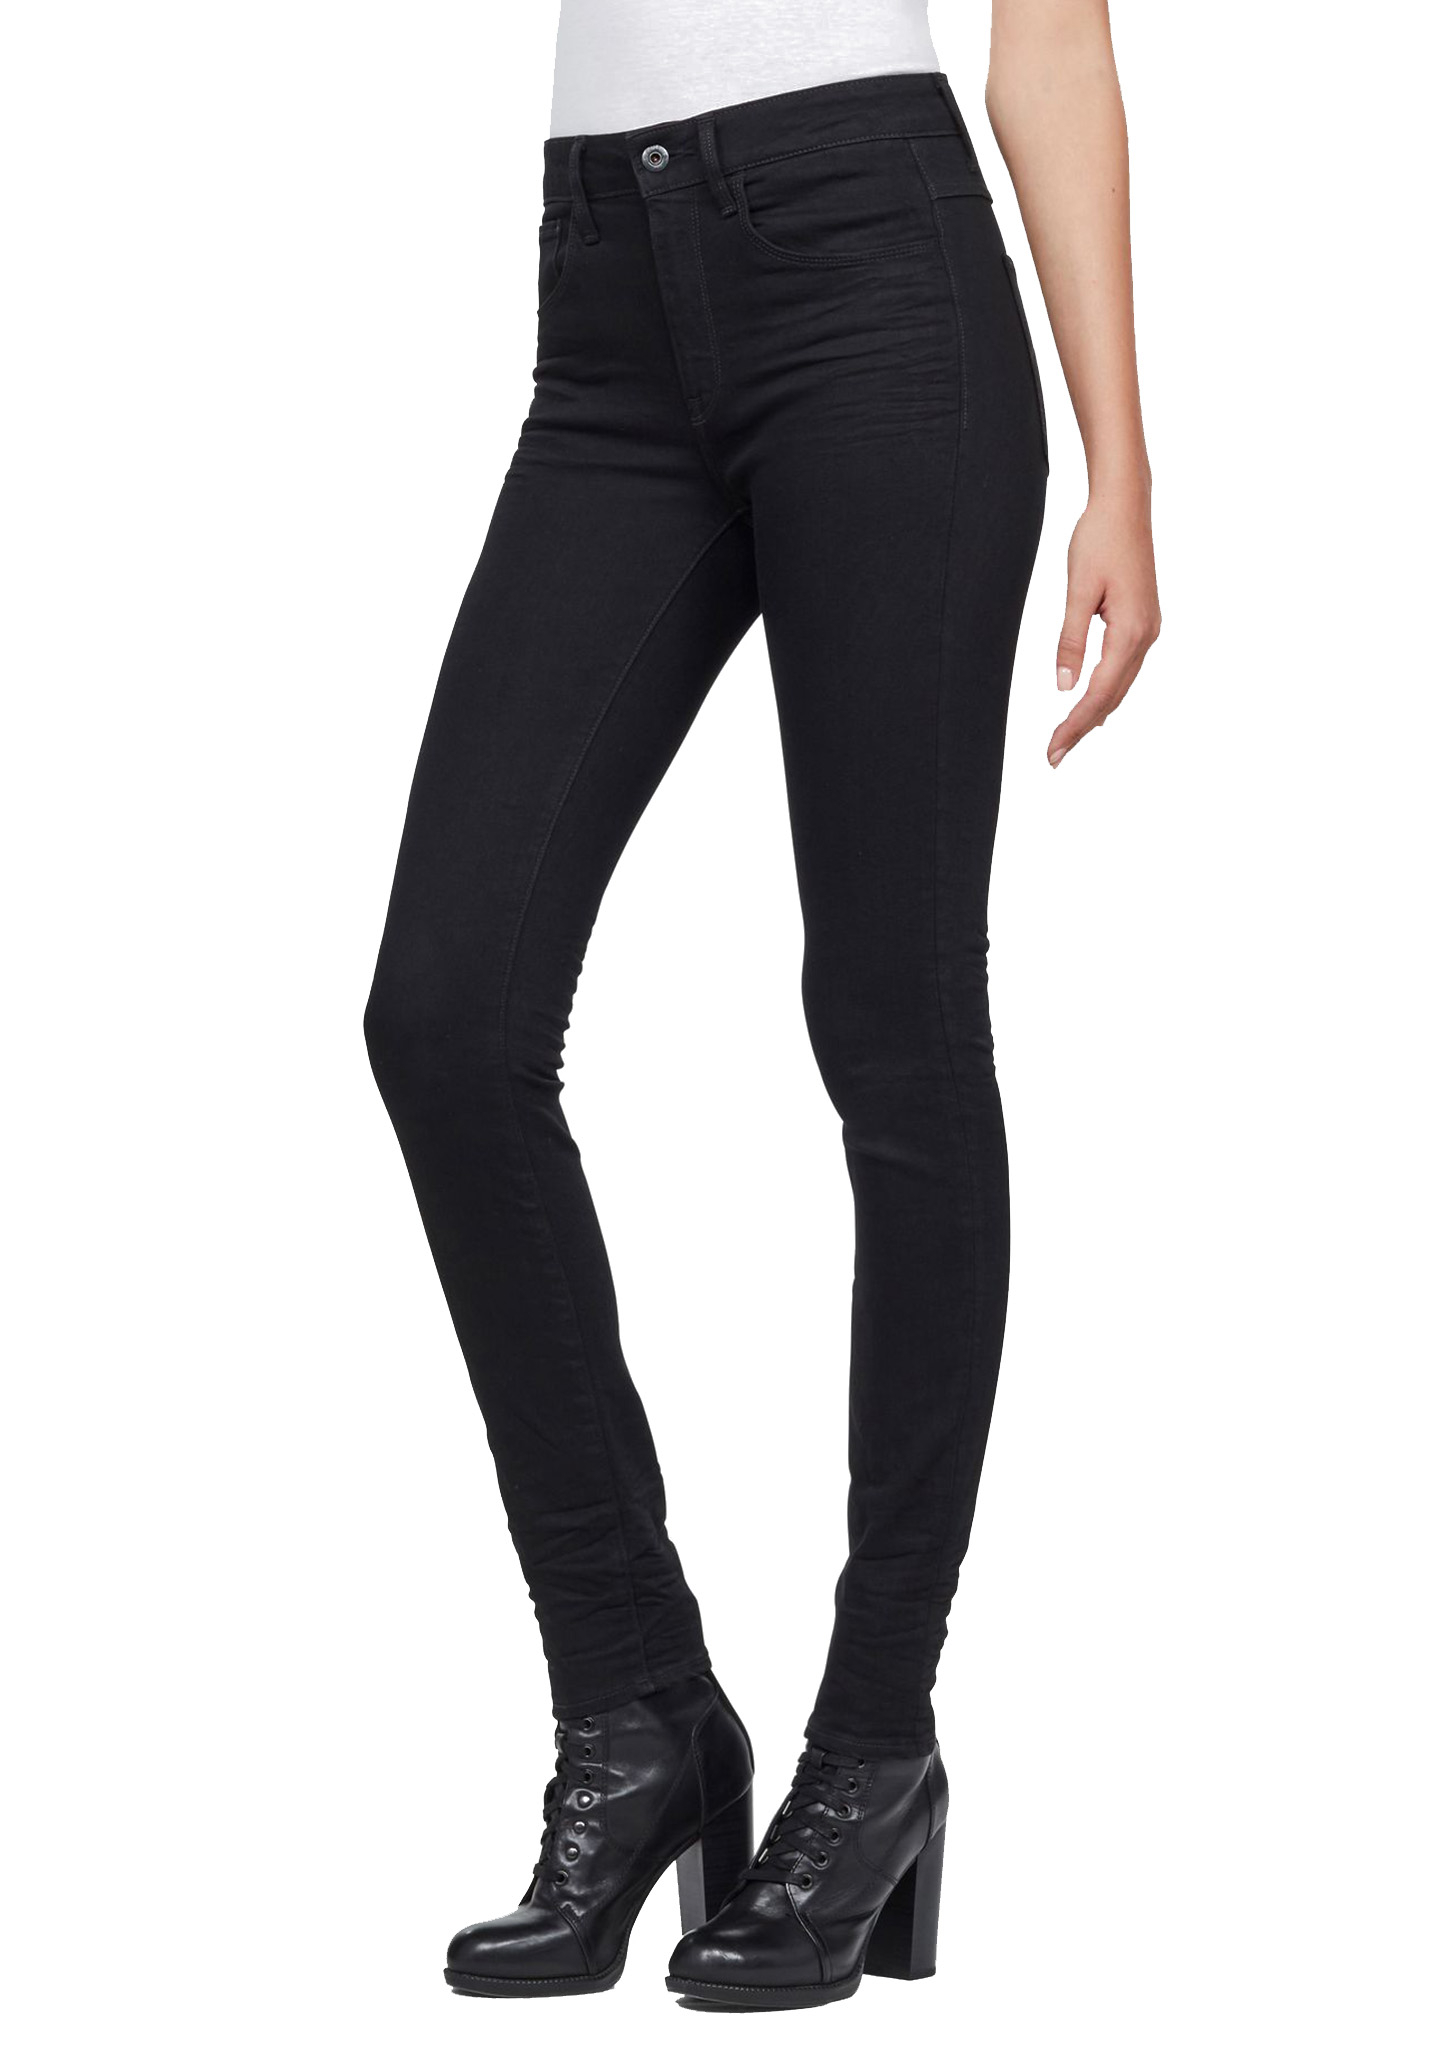 G-Star 3301 Deconstructed High Waist Skinny Skinny Jeans rinsed 24/28